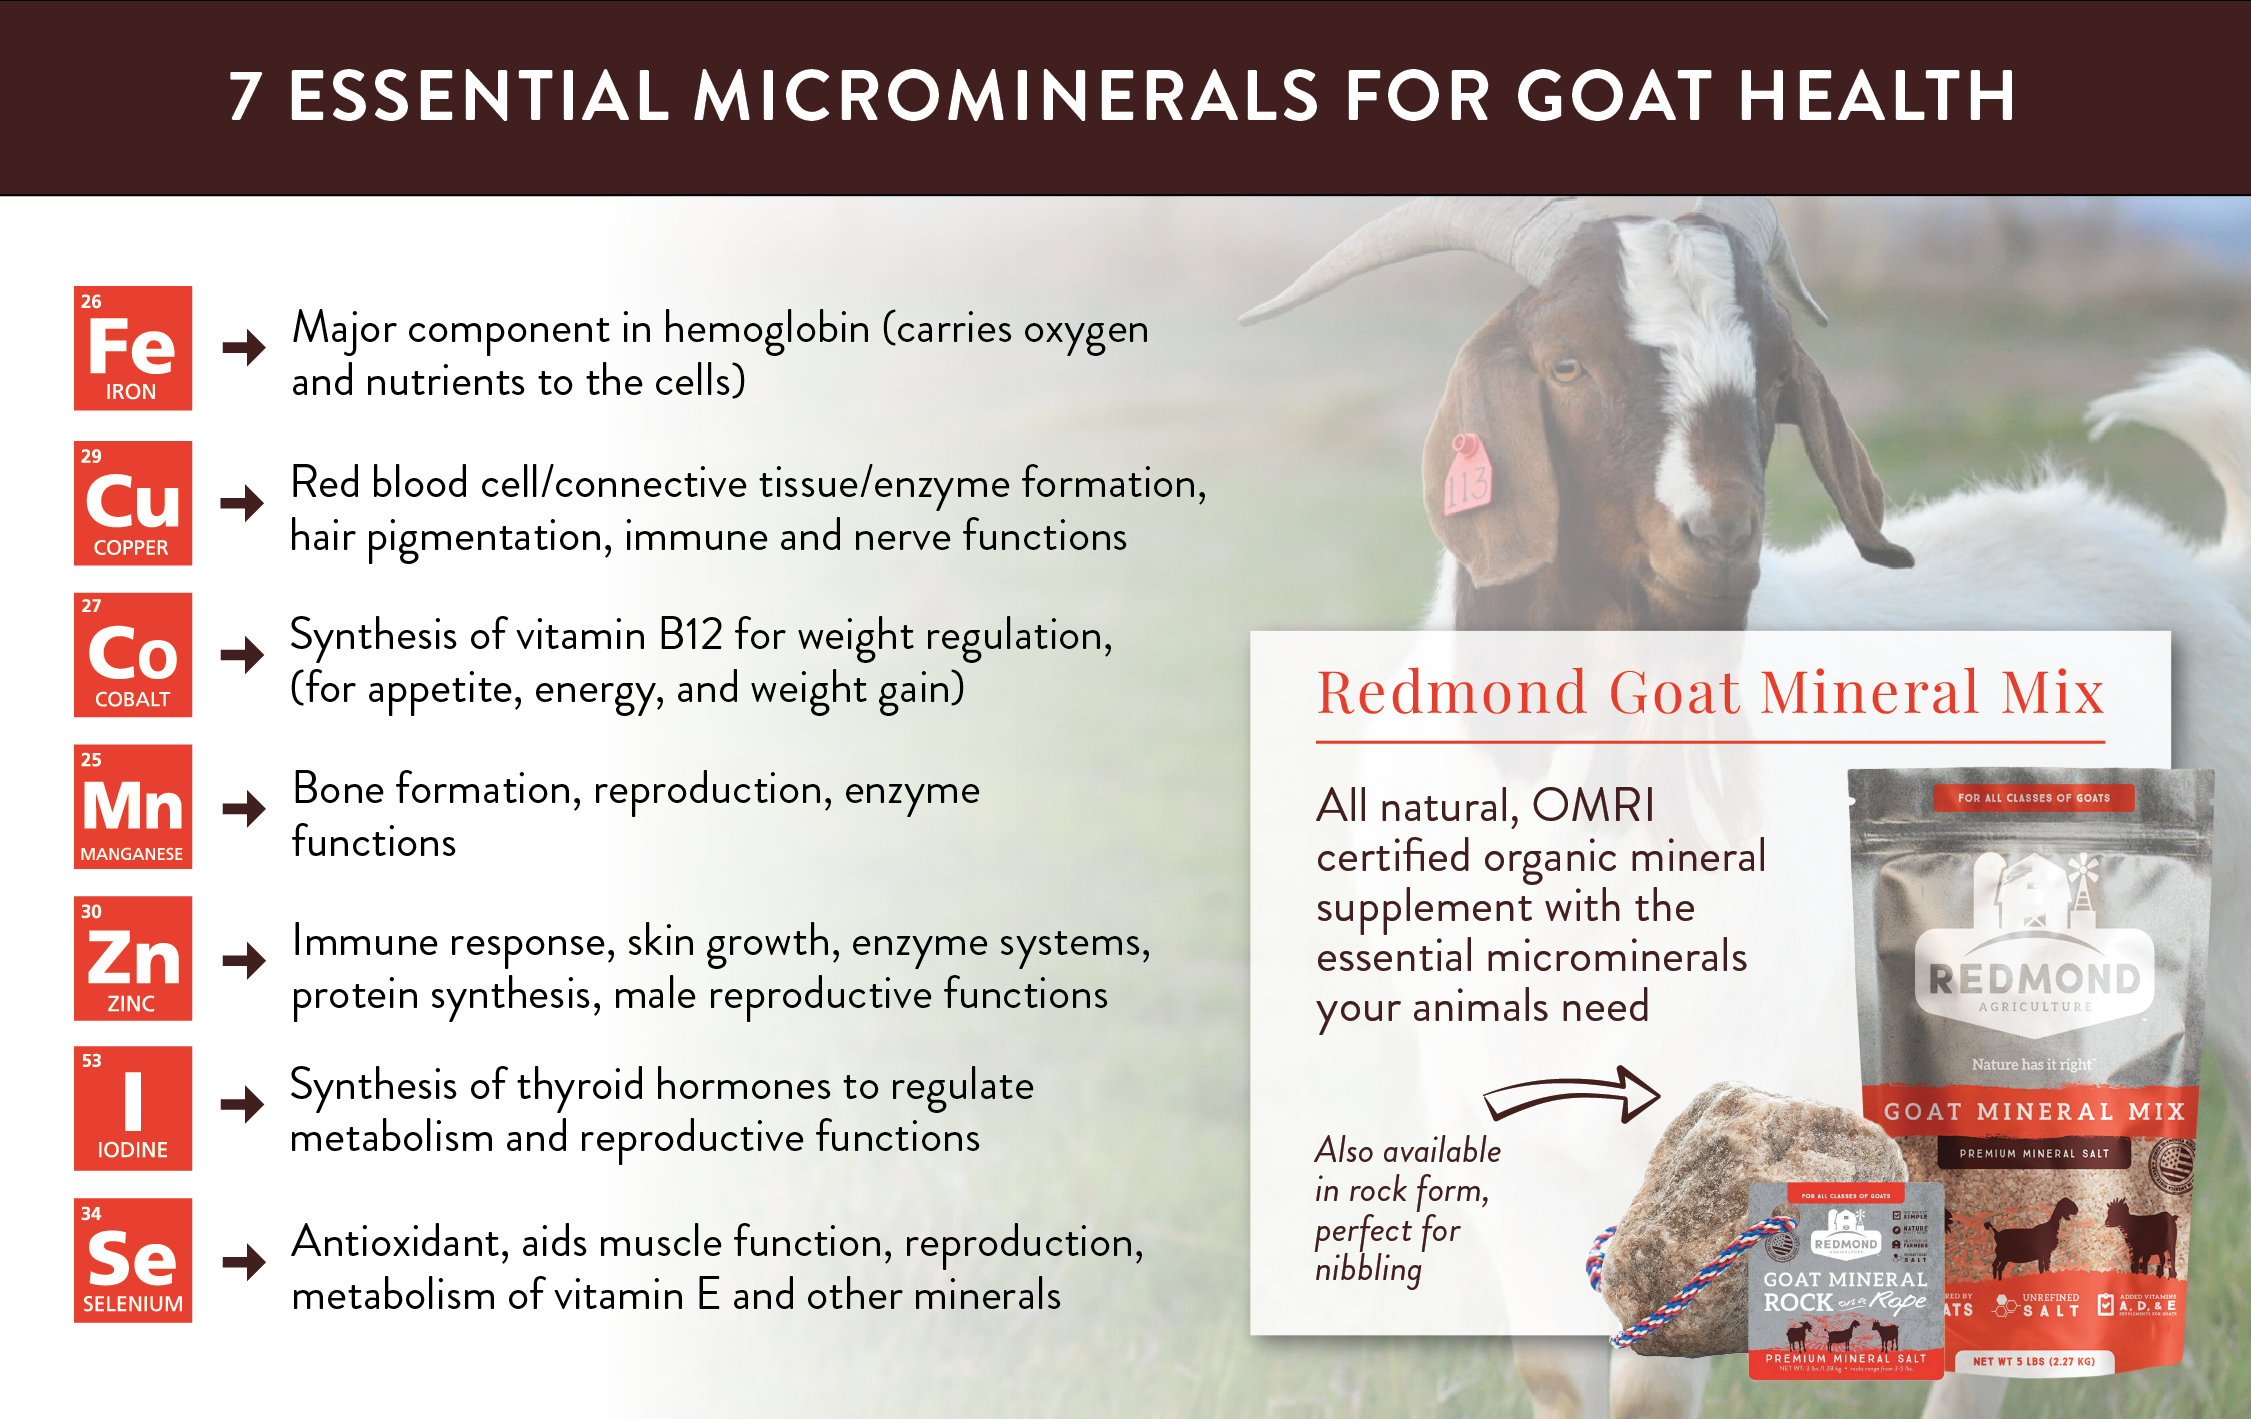 Essential microminerals for goats